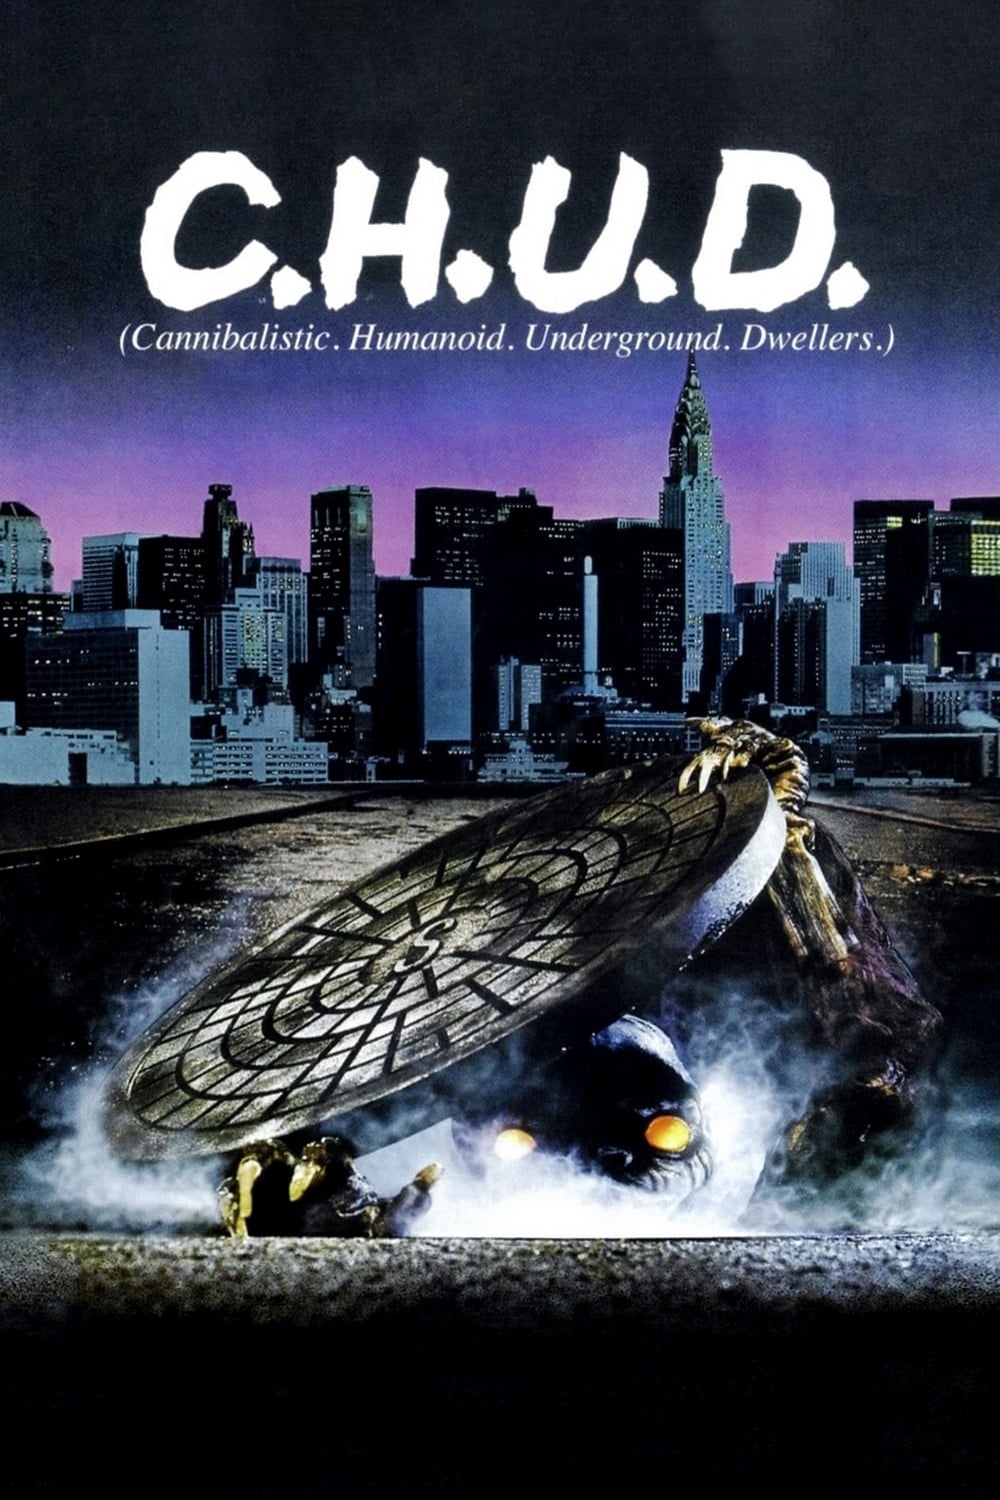 Poster for the movie "C.H.U.D."